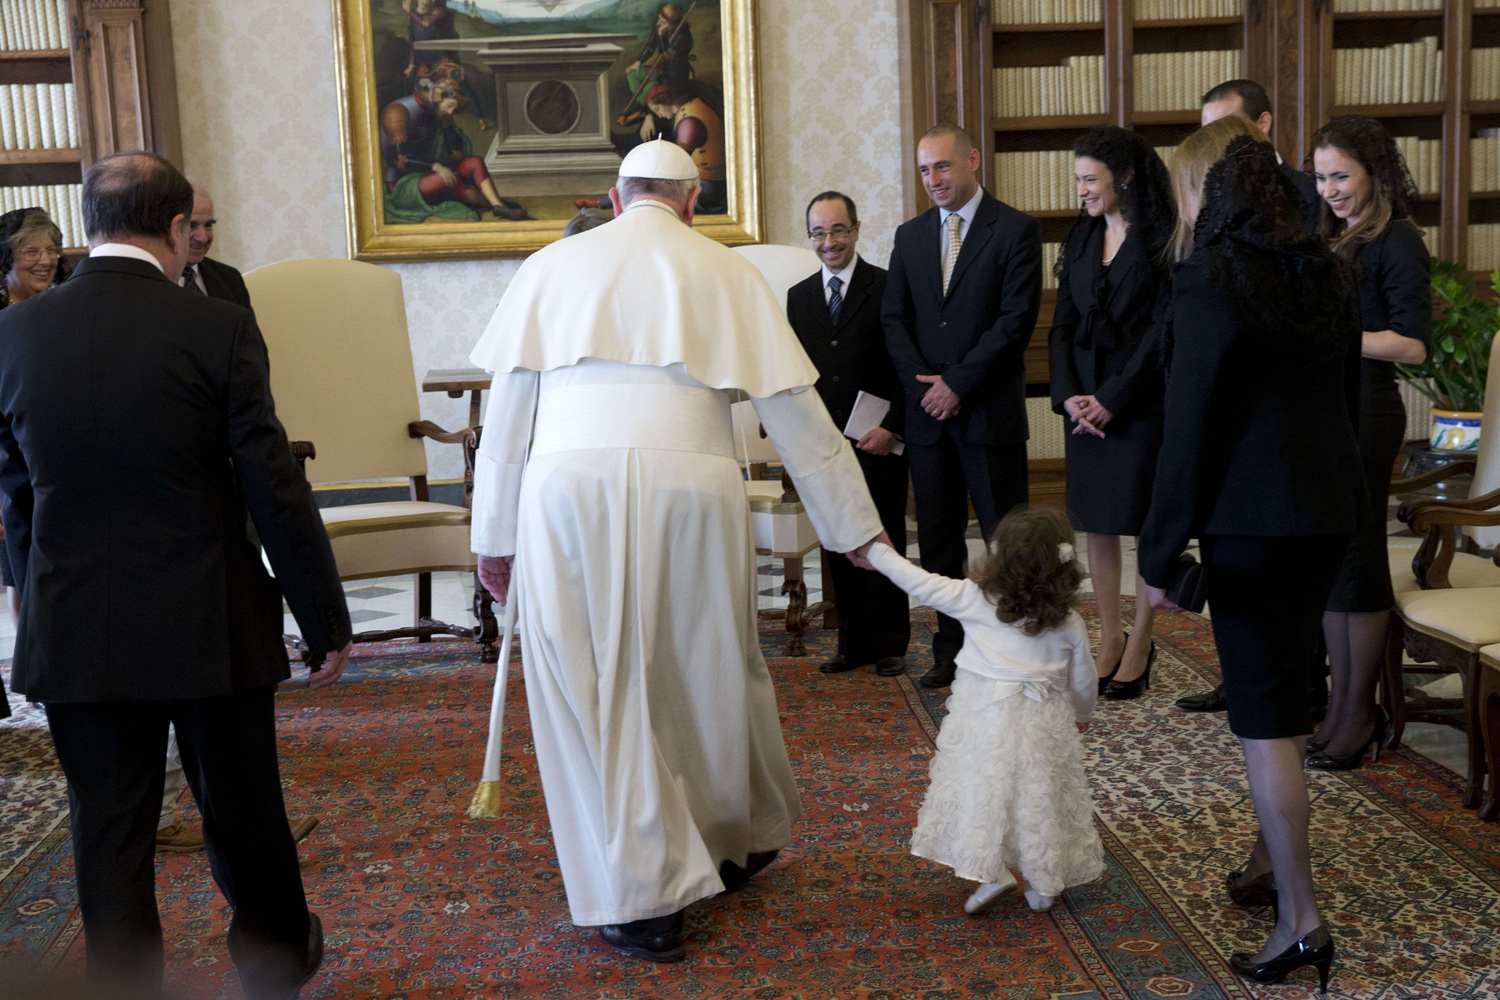 Mar. 21, 2014. Pope Francis holds Giorgia May, the granddaughter of Malta's President George Abela (L), by the hand during a private audience in the Pontiff's studio at the Vatican.